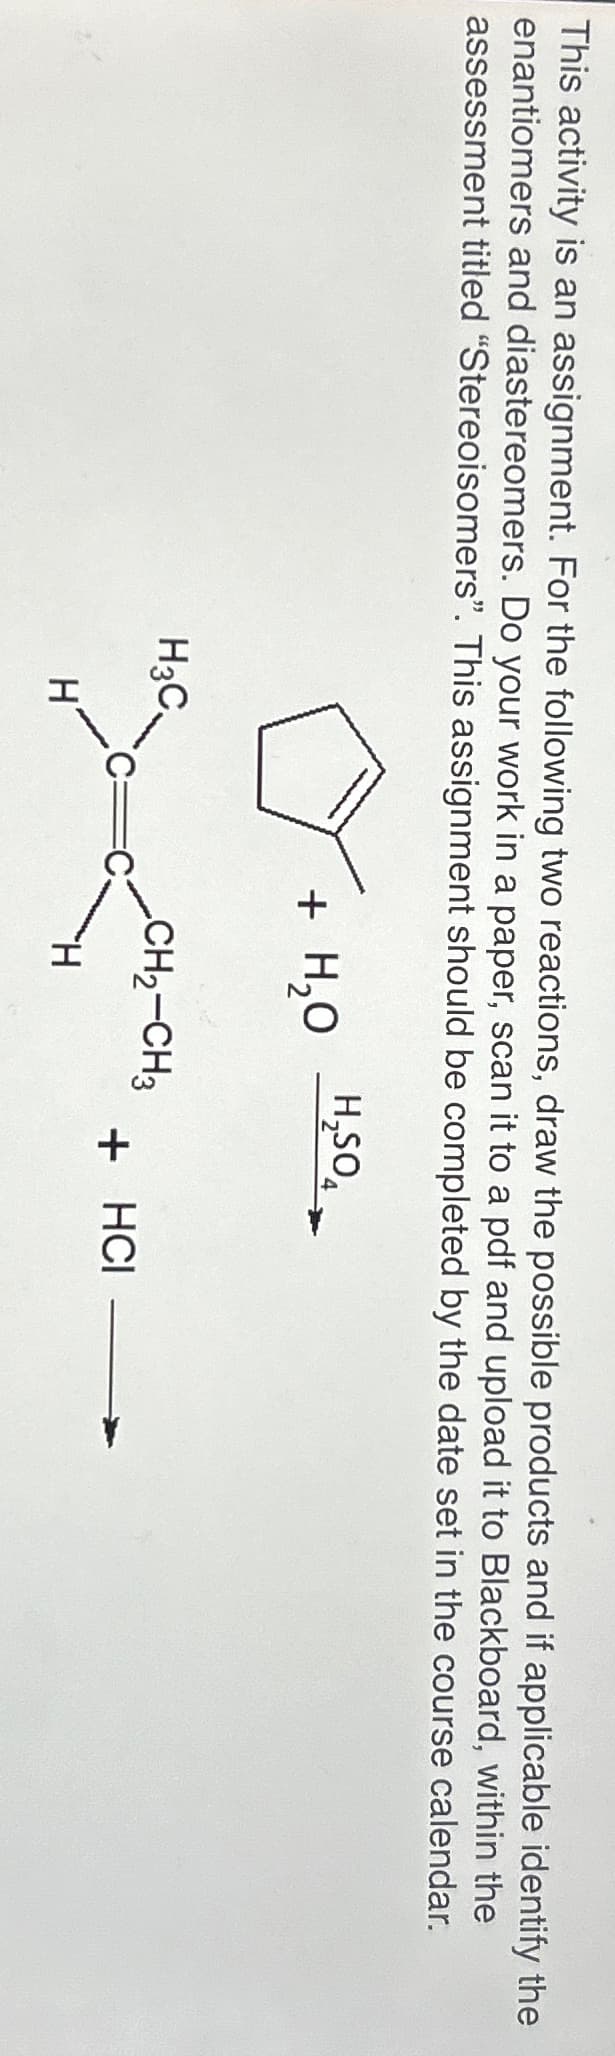 This activity is an assignment. For the following two reactions, draw the possible products and if applicable identify the
enantiomers and diastereomers. Do your work in a paper, scan it to a pdf and upload it to Blackboard, within the
assessment titled "Stereoisomers". This assignment should be completed by the date set in the course calendar.
H3C
H₂SO4
+ H₂O
CH2-CH3
H
H
+ HCI